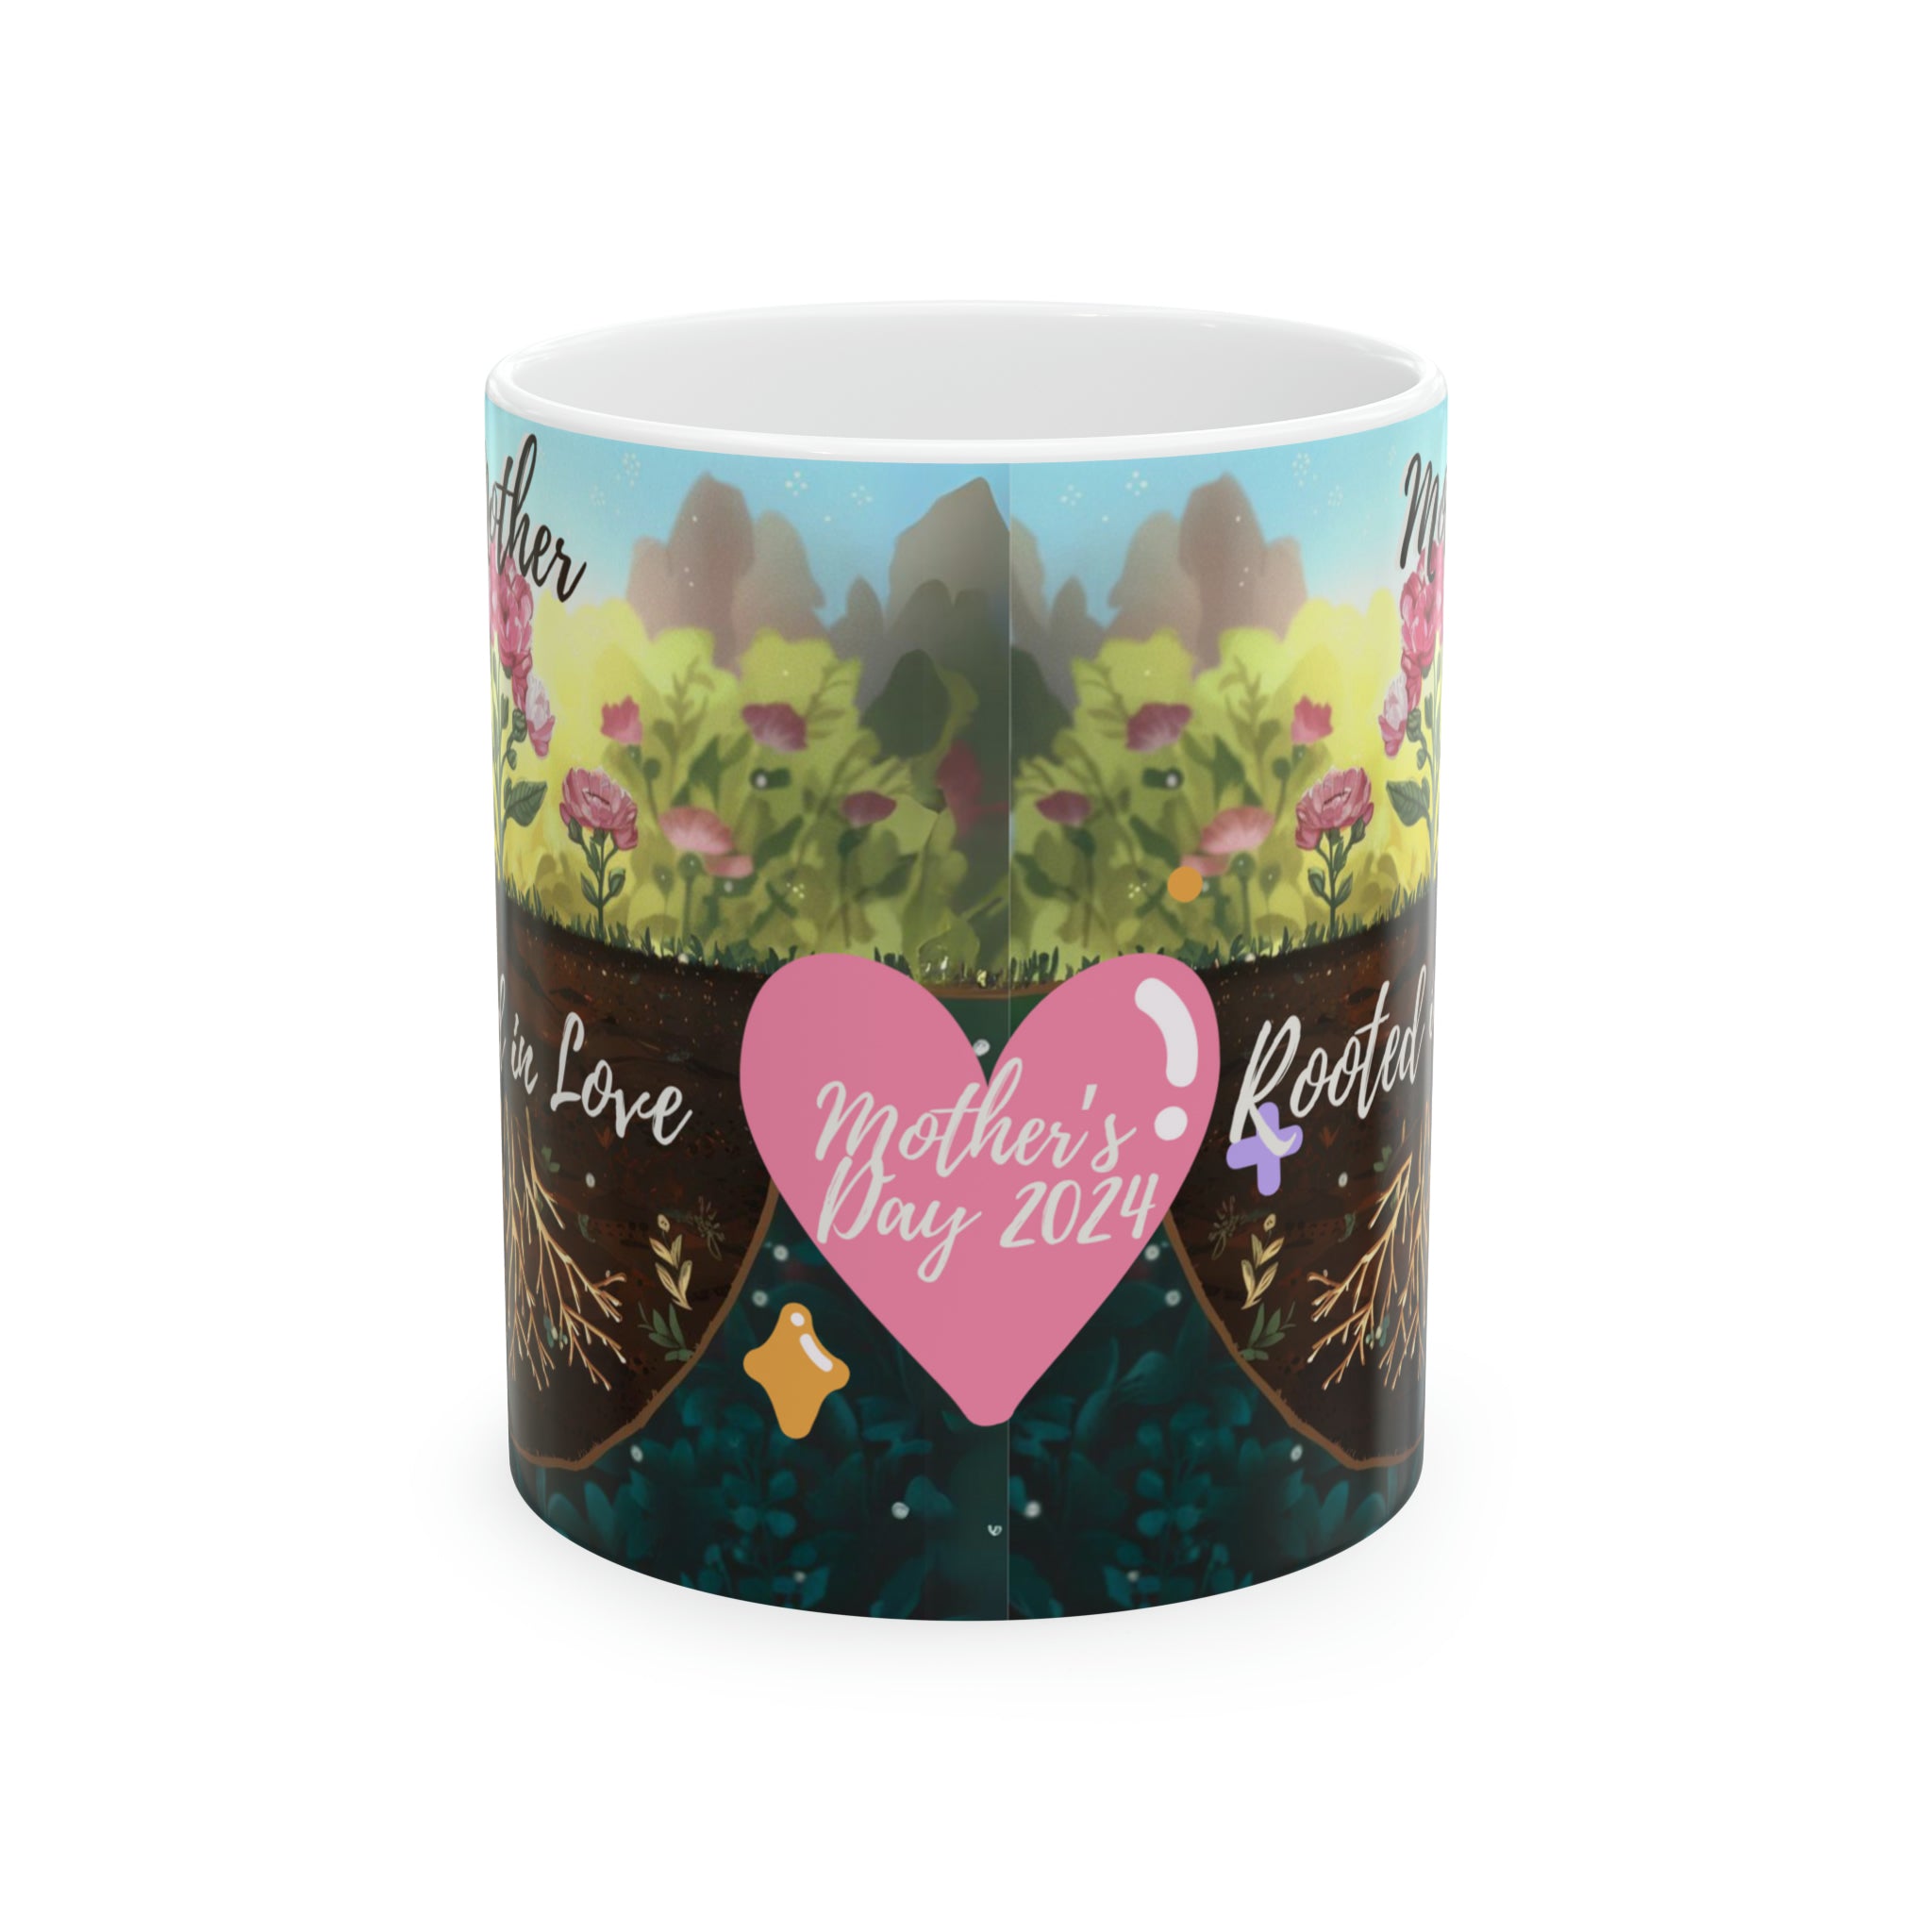 Mother, Rooted in Love - Ceramic Mug, 11oz